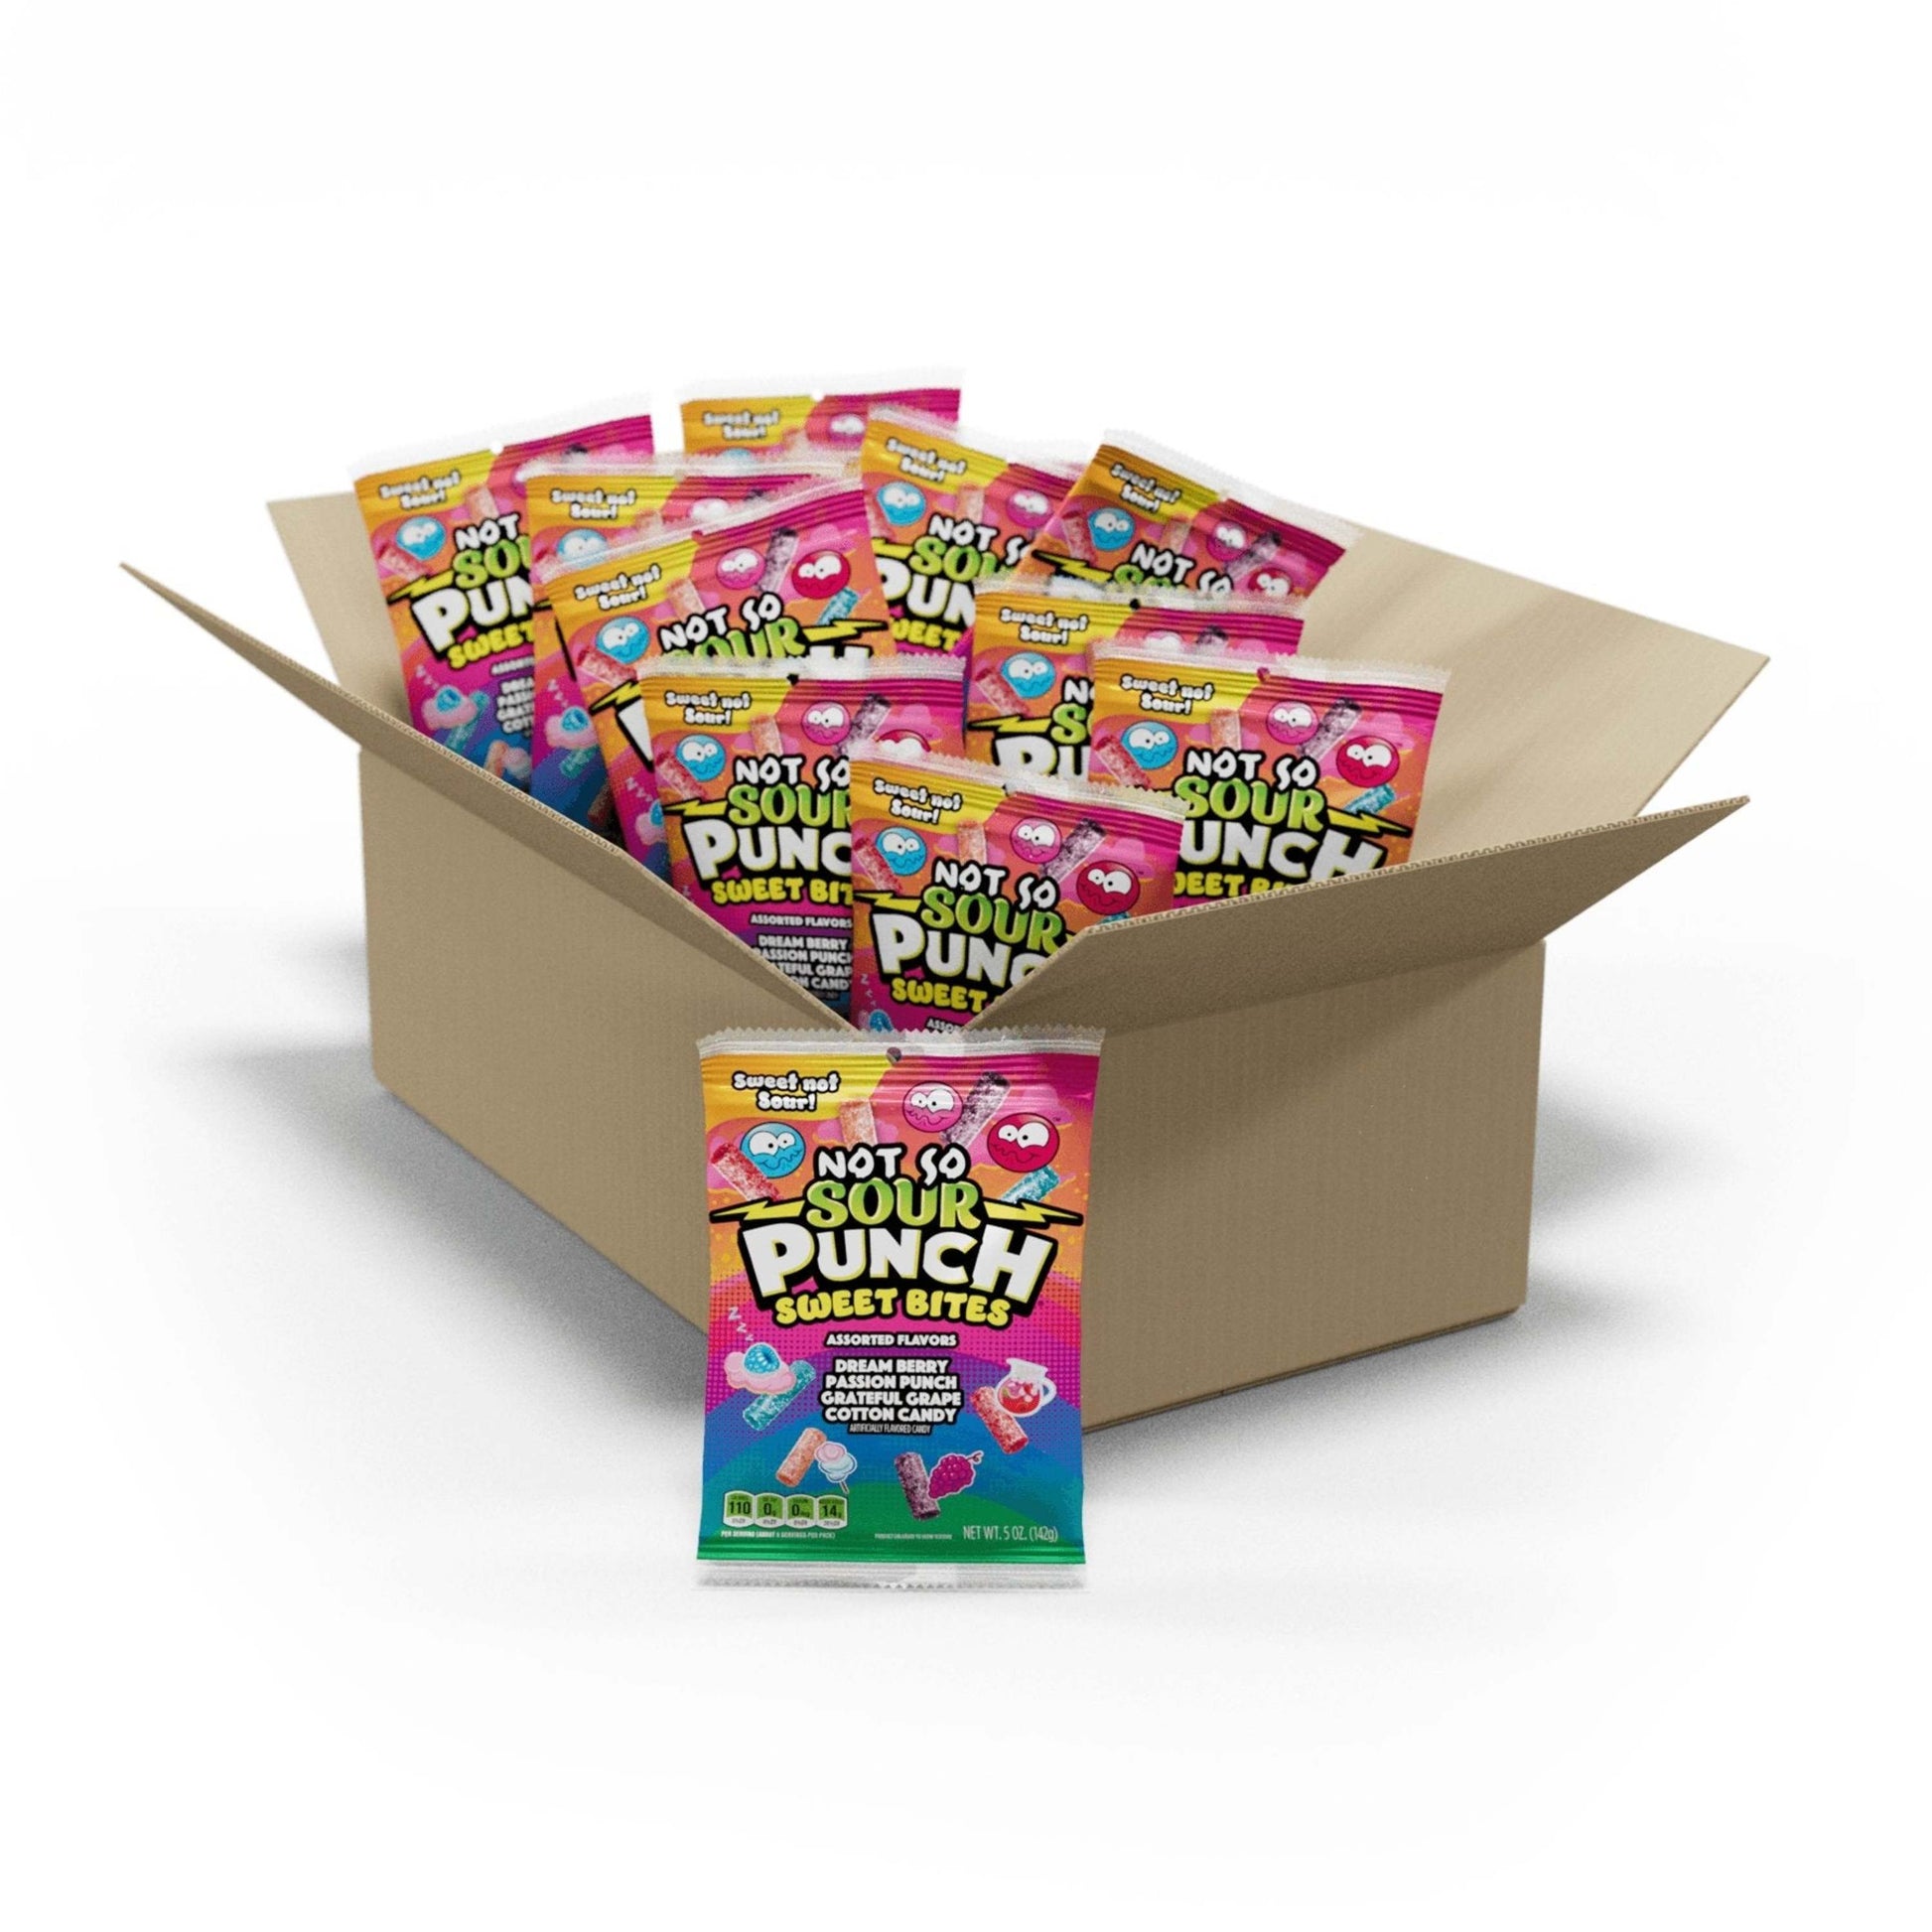 12 count box of Sour Punch Sweet (not sour) Bites Assorted Candy 5oz bags